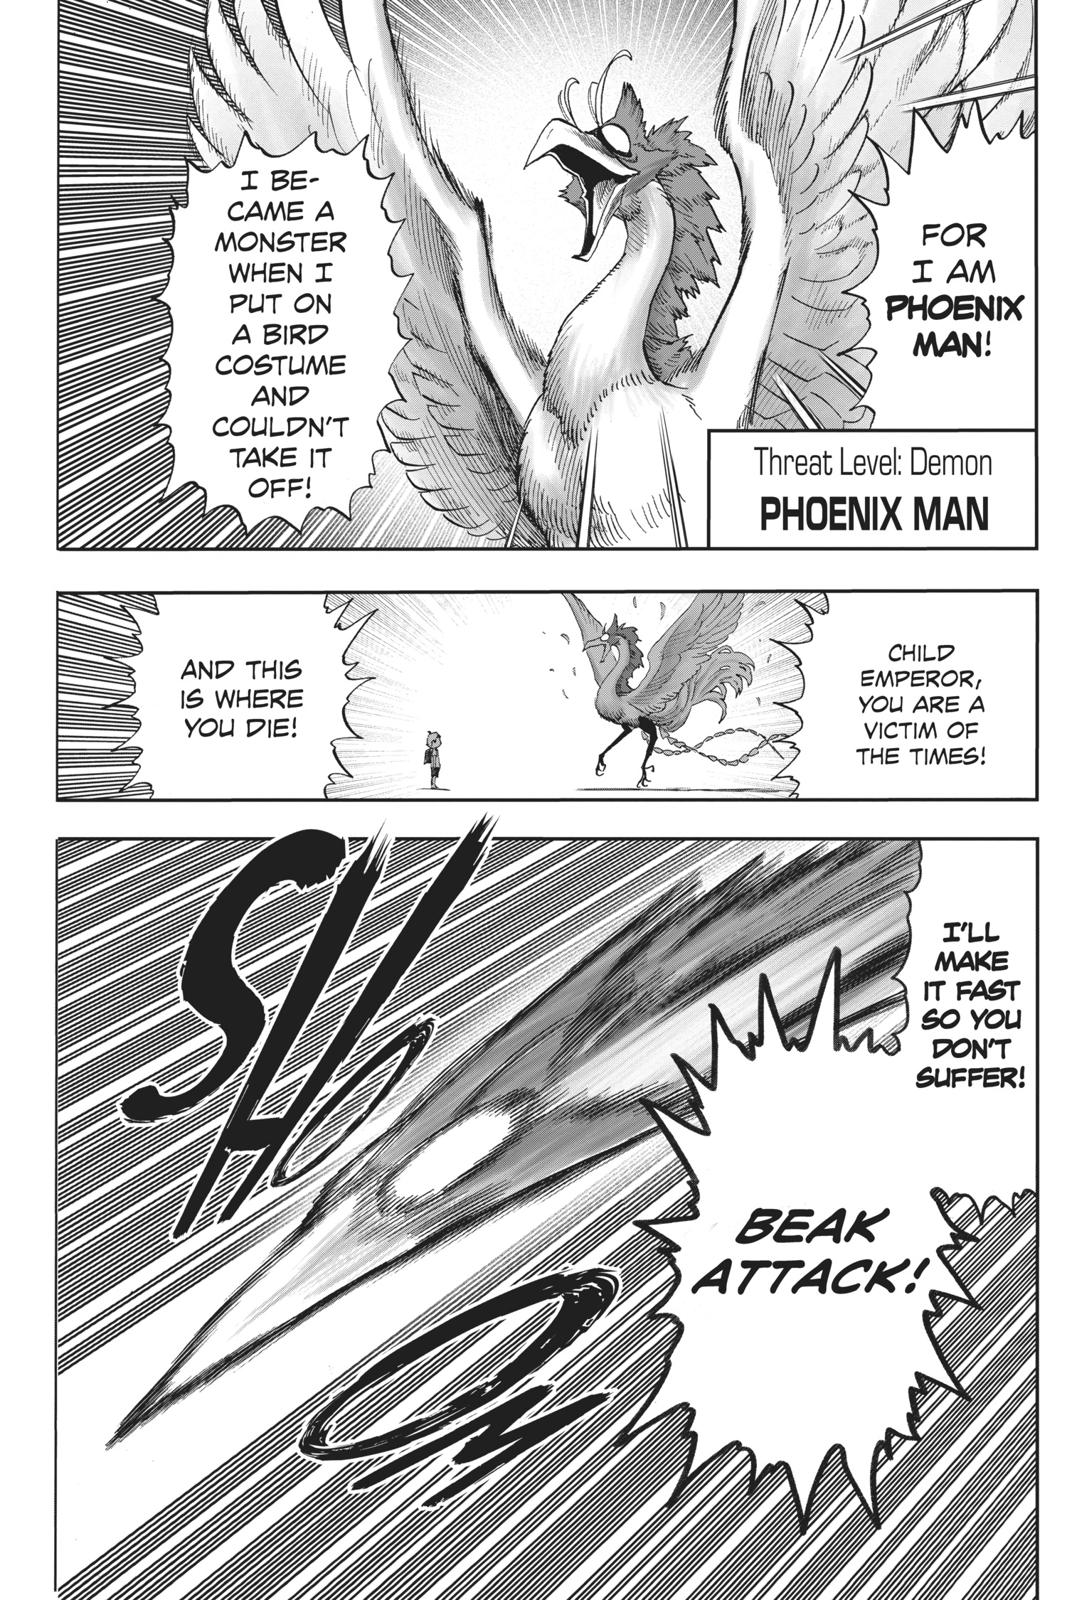 One-Punch Man, Punch 100 image 12